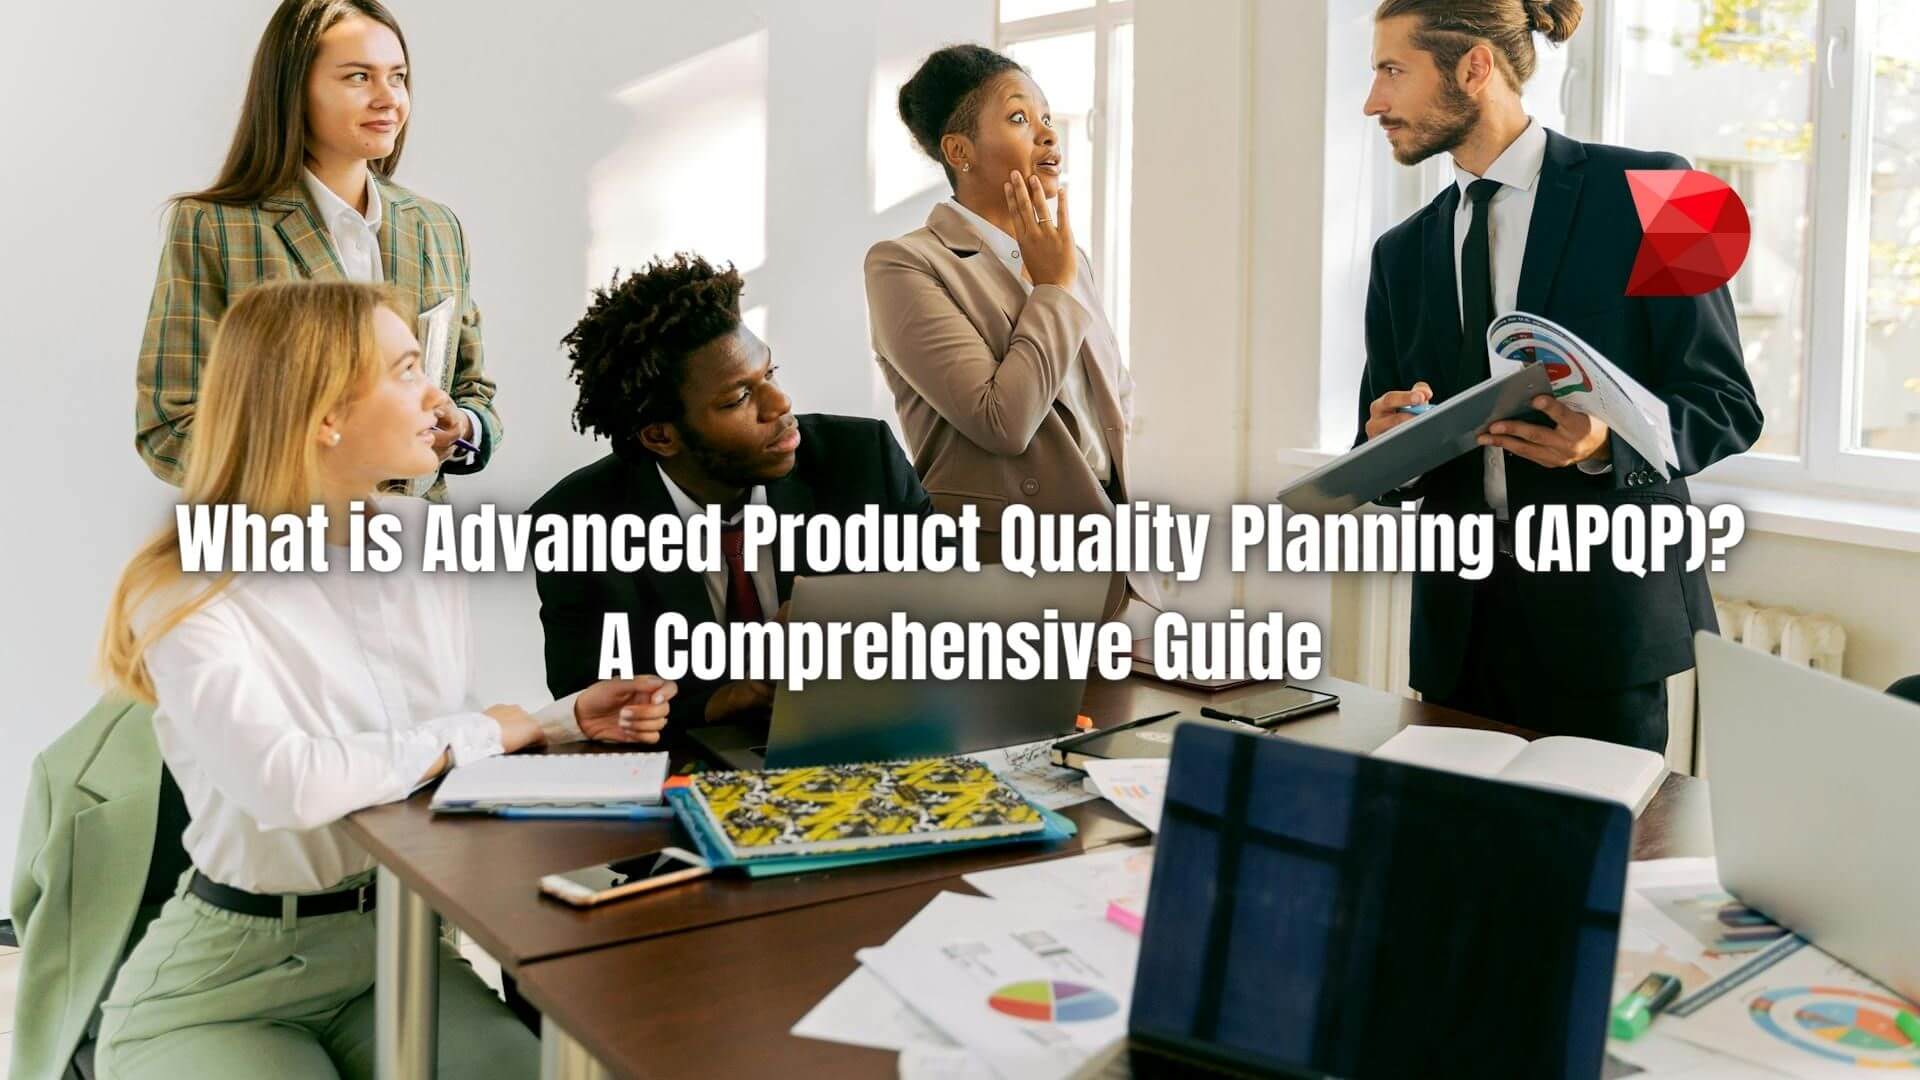 Elevate your quality management strategies today! Discover the power of Advanced Product Quality Planning (APQP) with our expert guide.